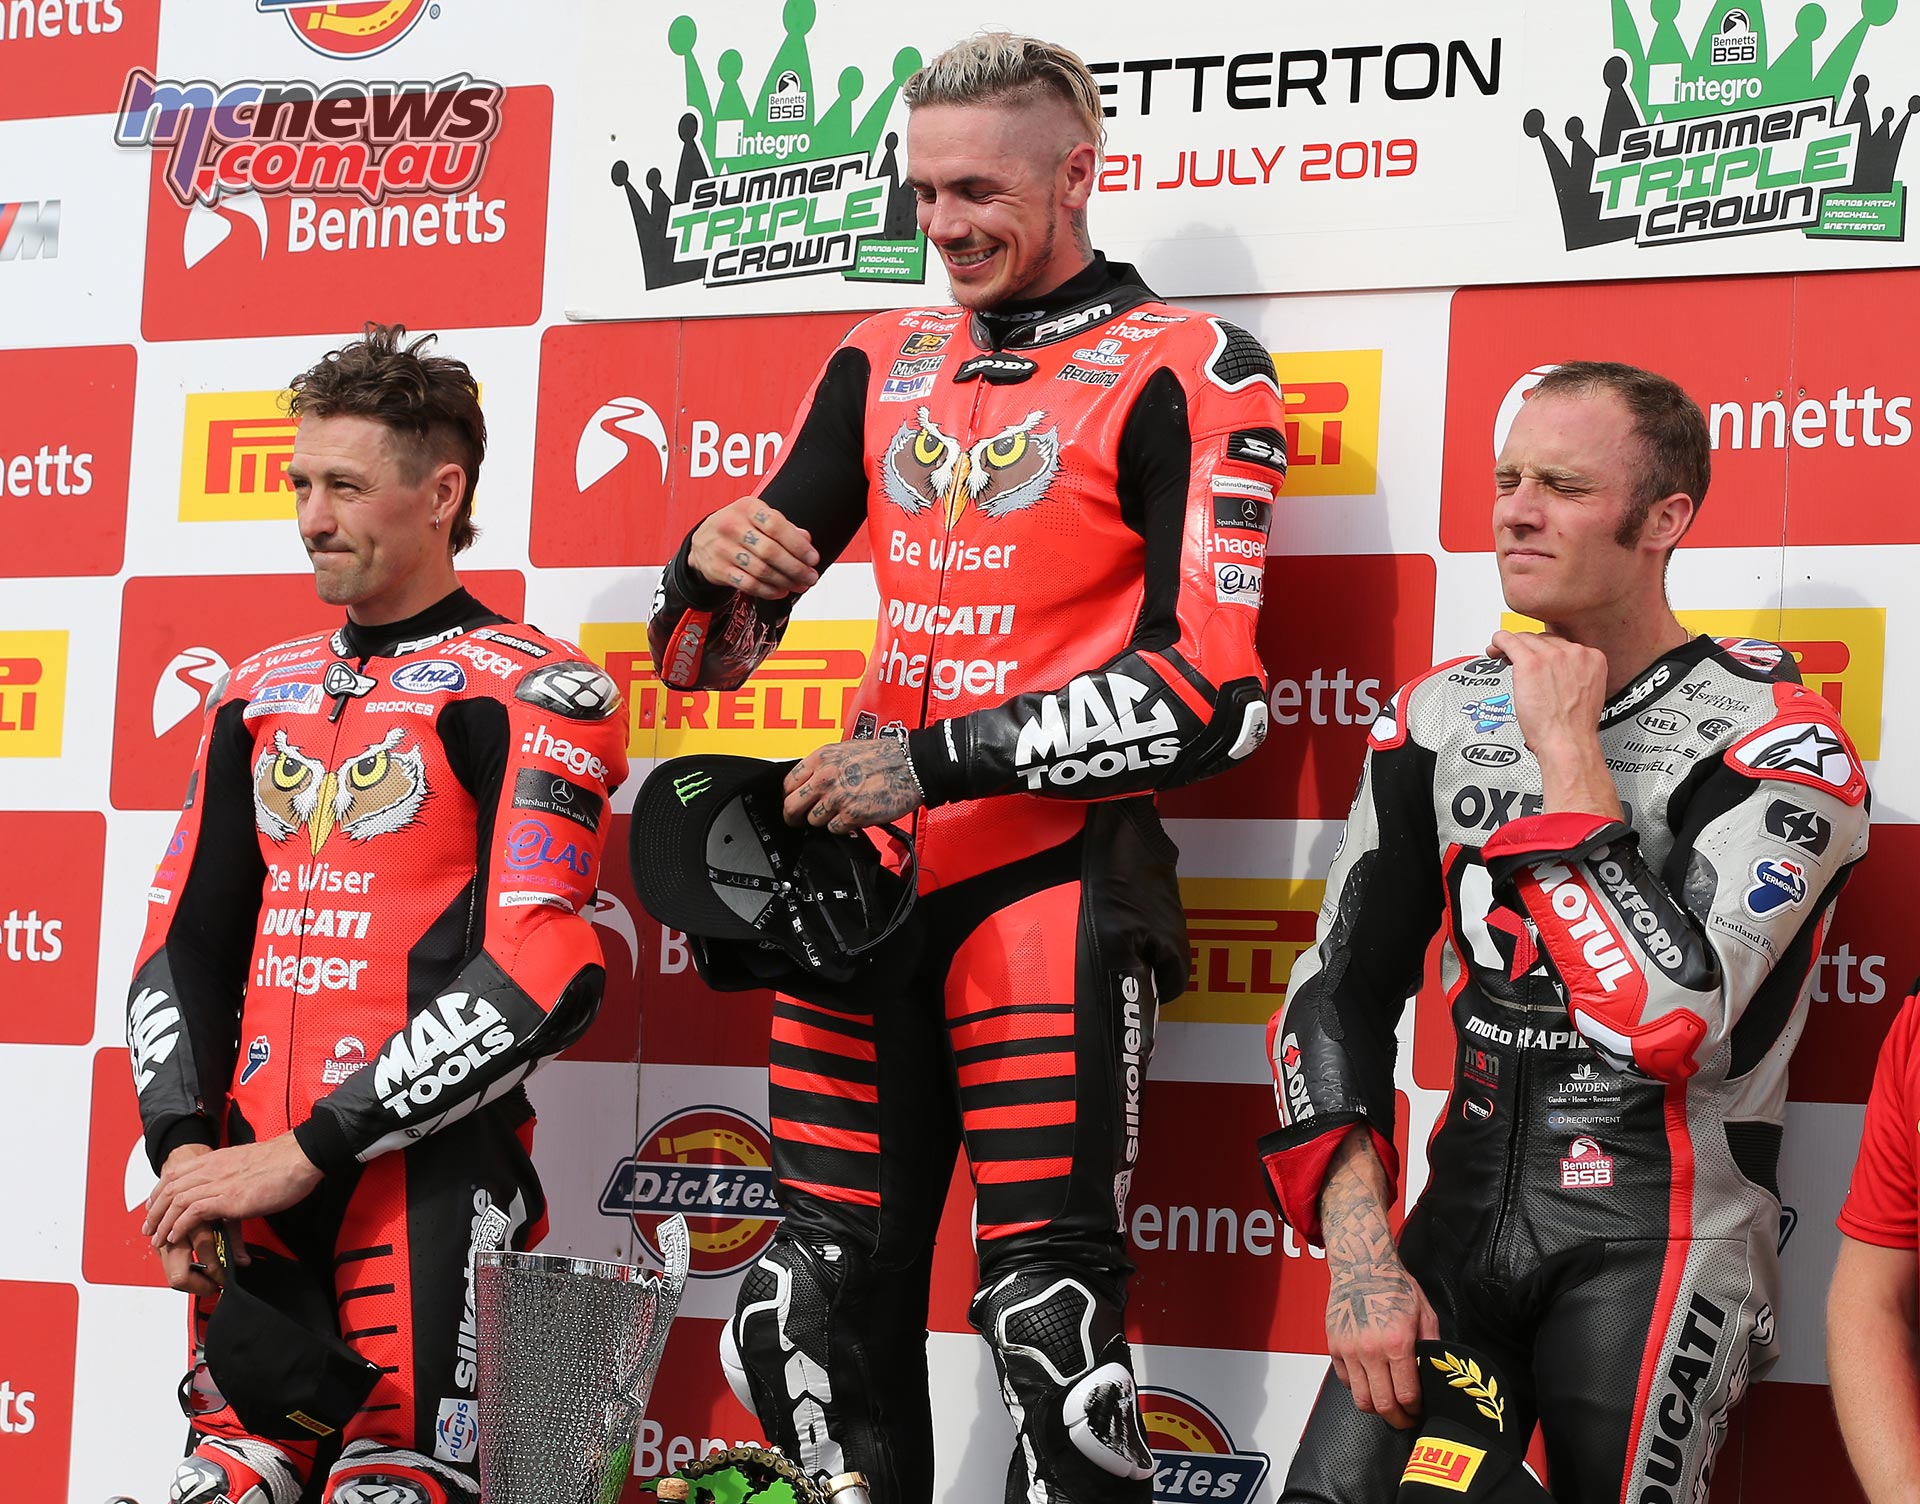 Snetterton Bsb Image Overload Part One Motorcycle News